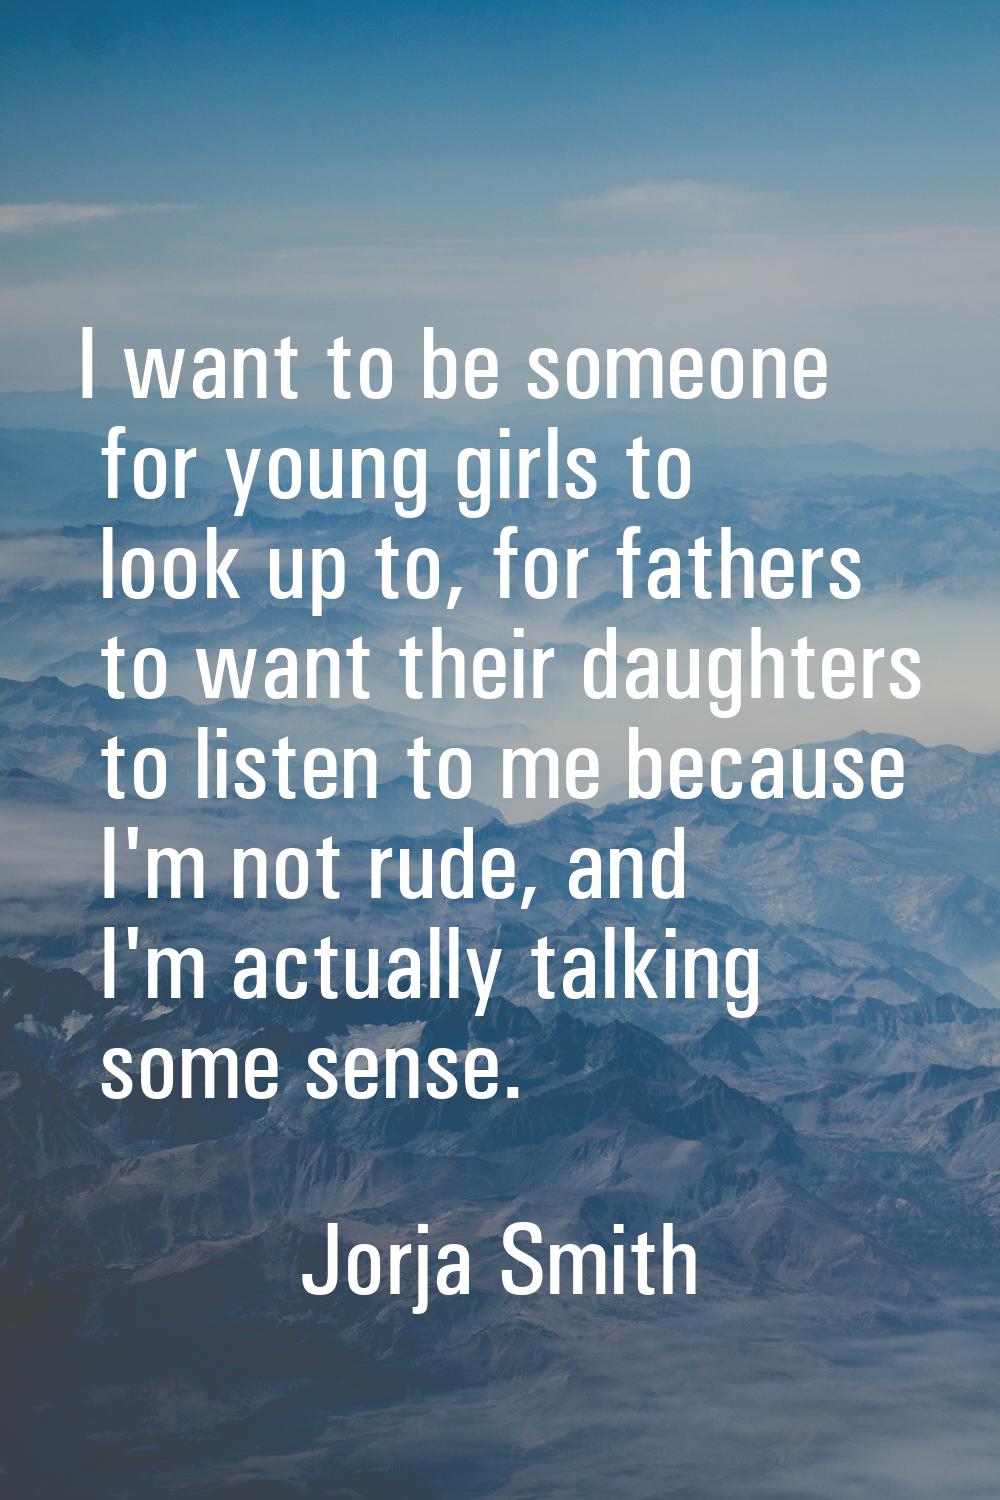 I want to be someone for young girls to look up to, for fathers to want their daughters to listen t